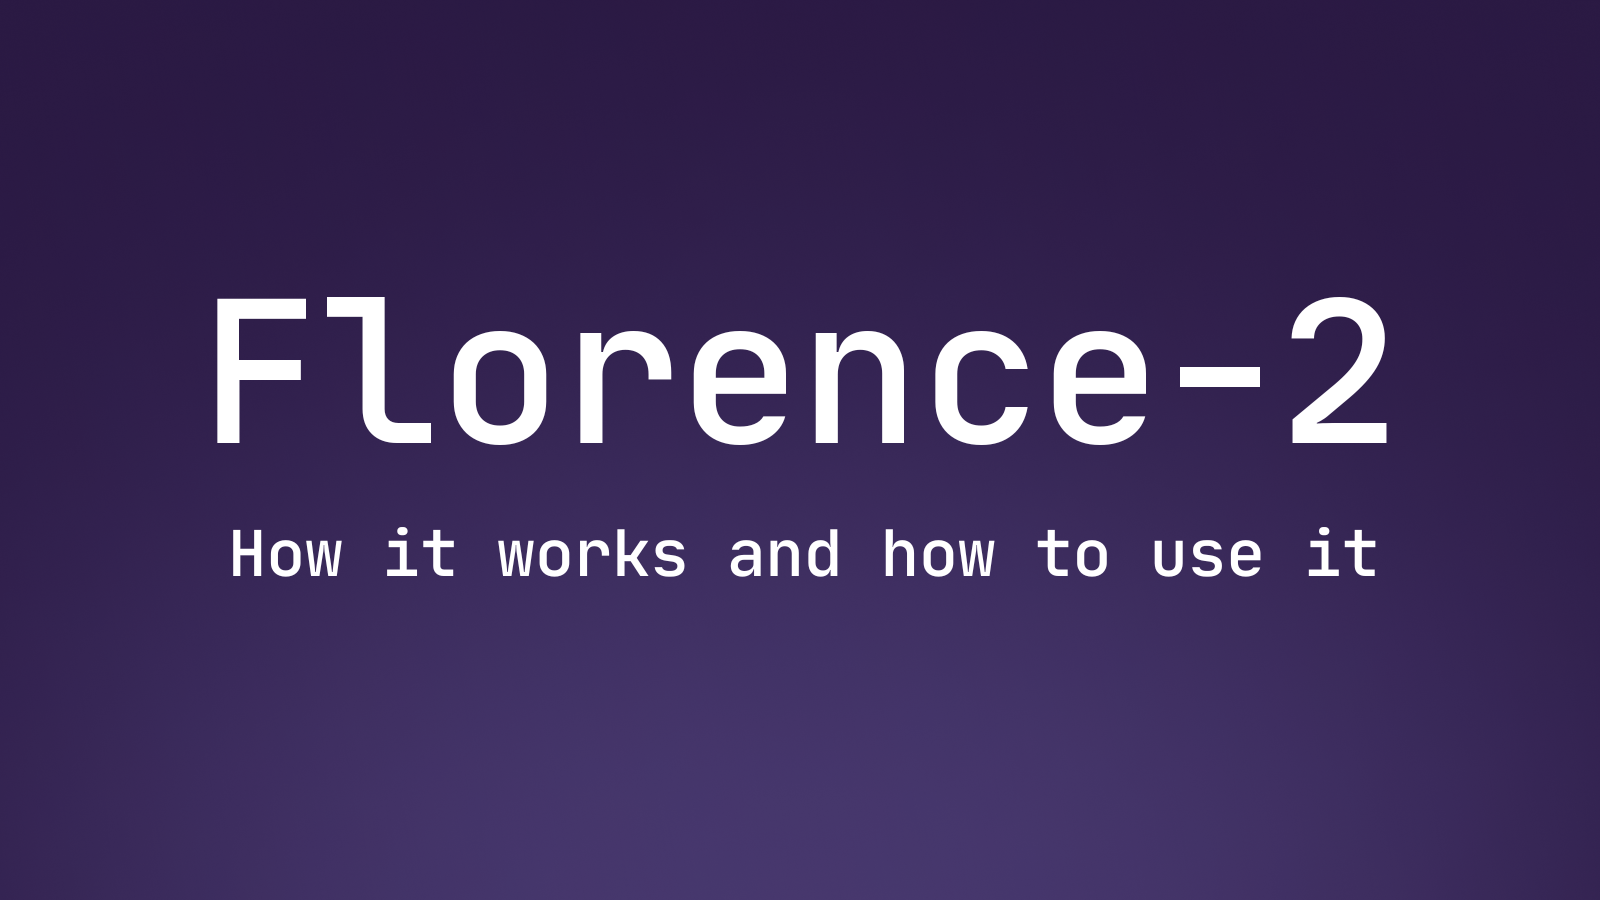 Florence-2: How it works and how to use it